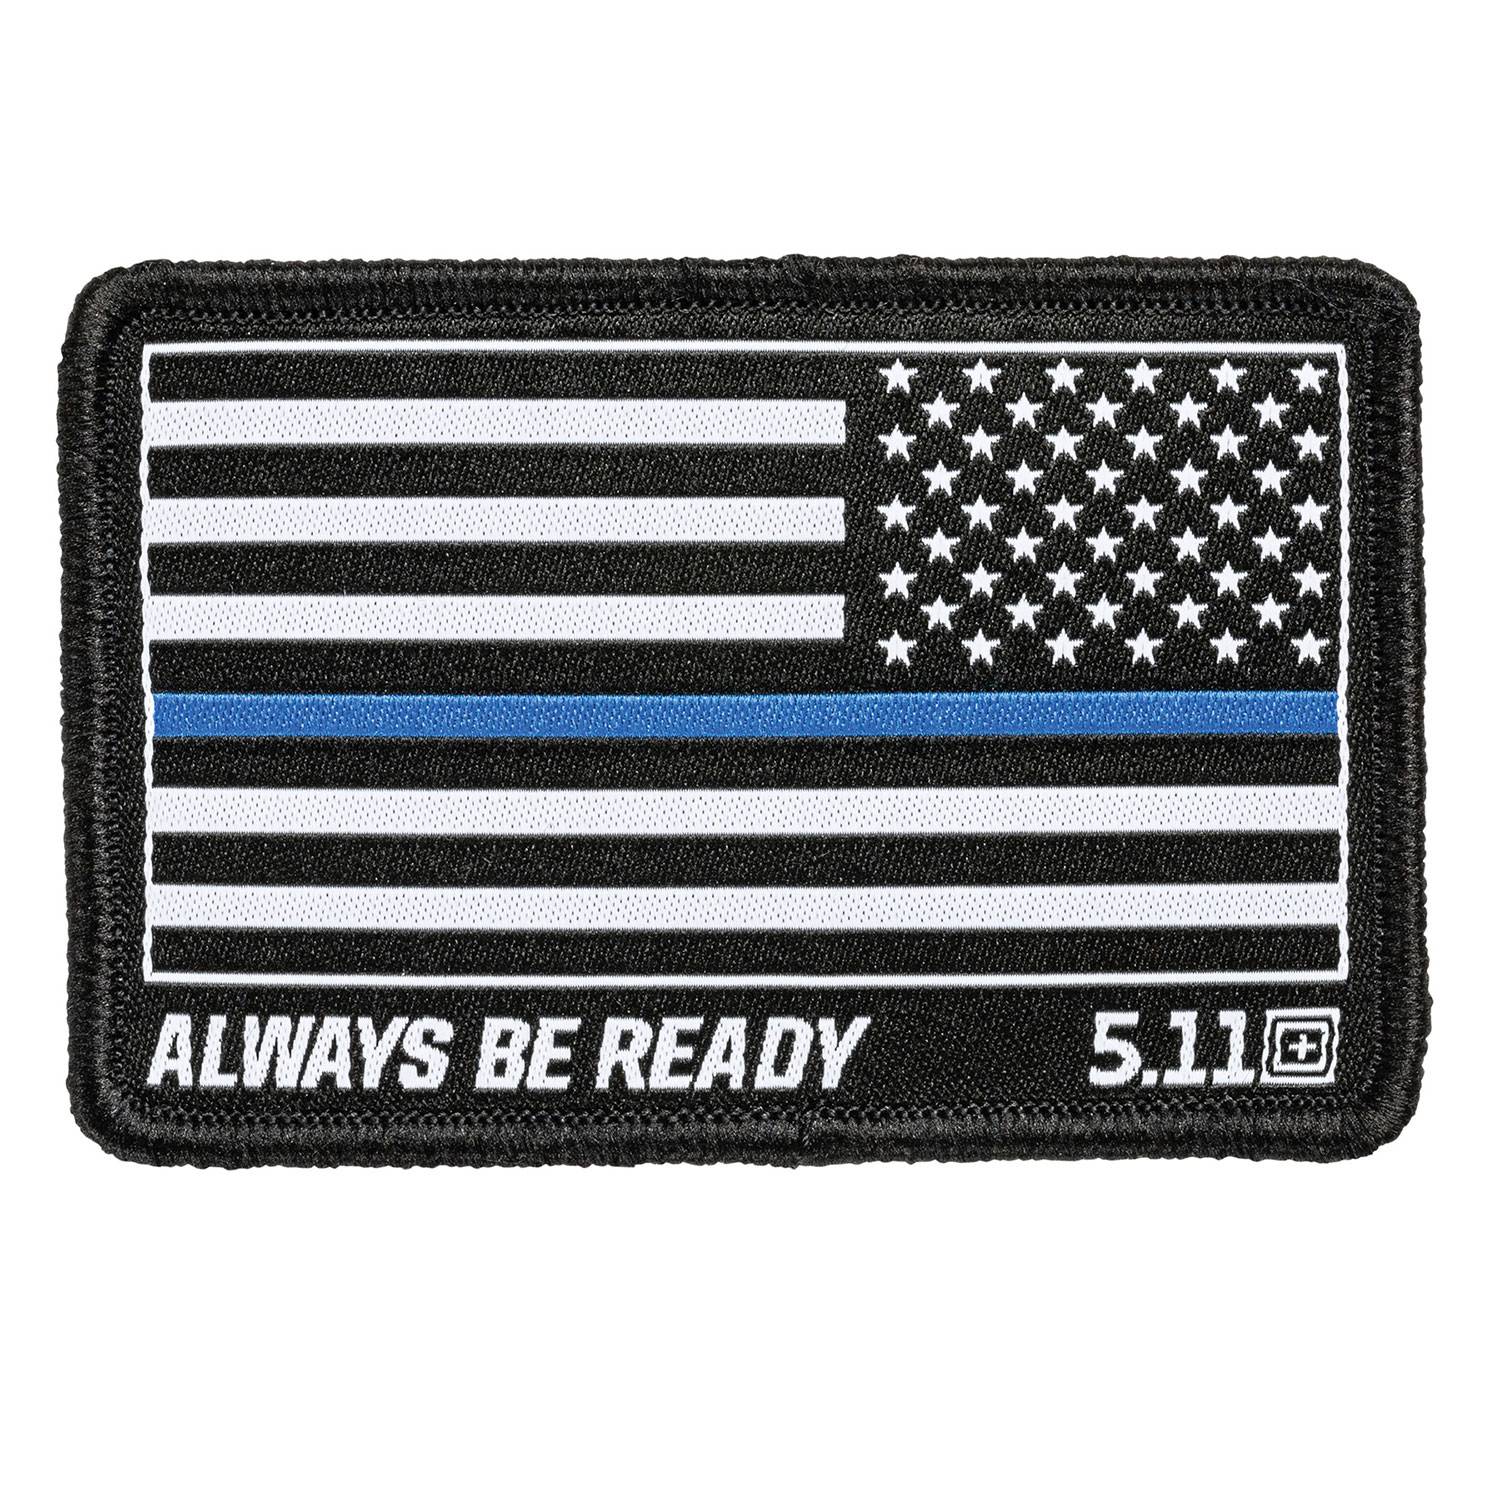 5.11 Reverse TBL Woven Patch